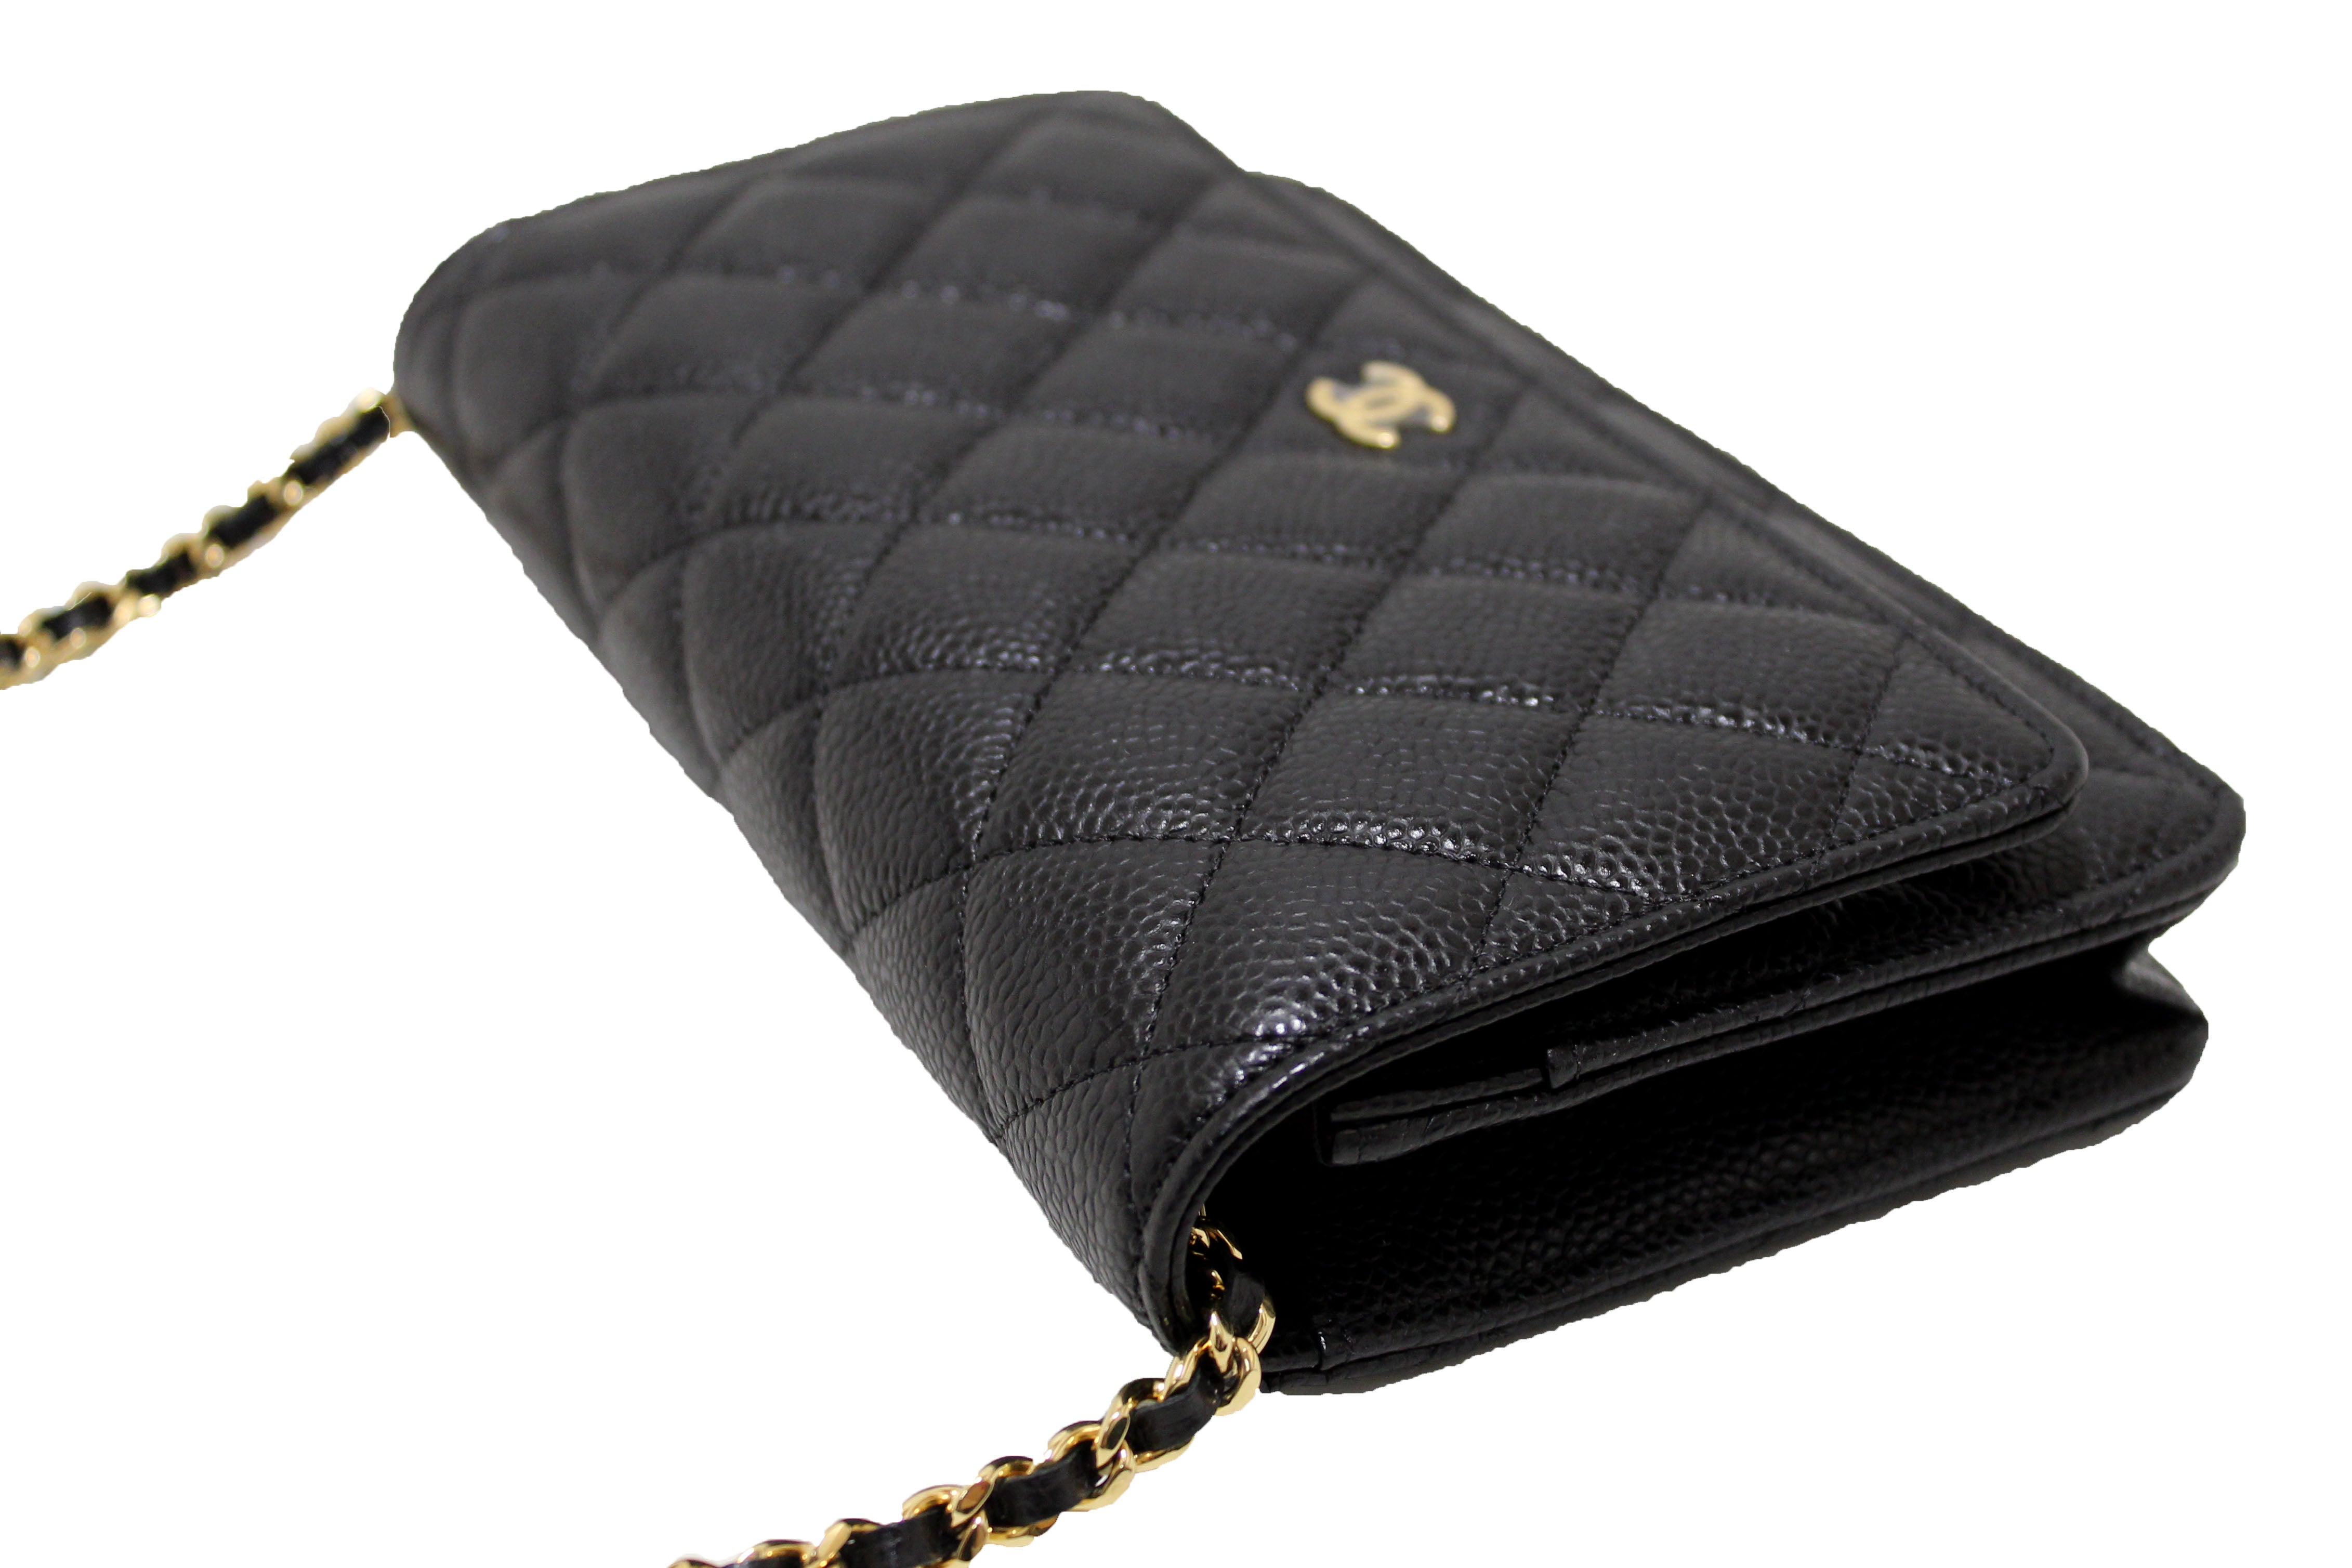 Authentic NEW Chanel Black Quilted Caviar Leather Wallet On Chain WOC Messenger Bag